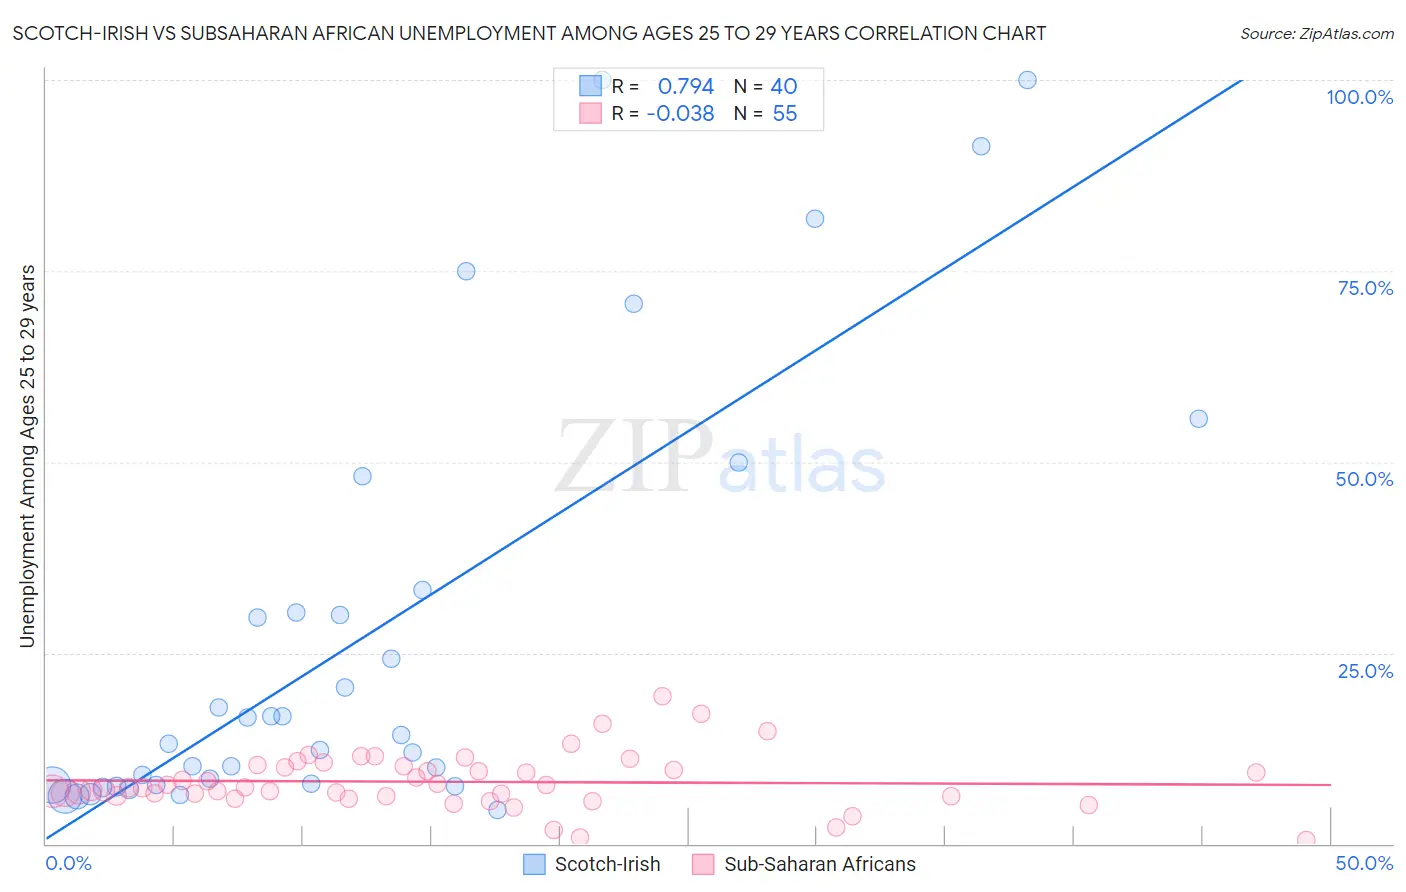 Scotch-Irish vs Subsaharan African Unemployment Among Ages 25 to 29 years